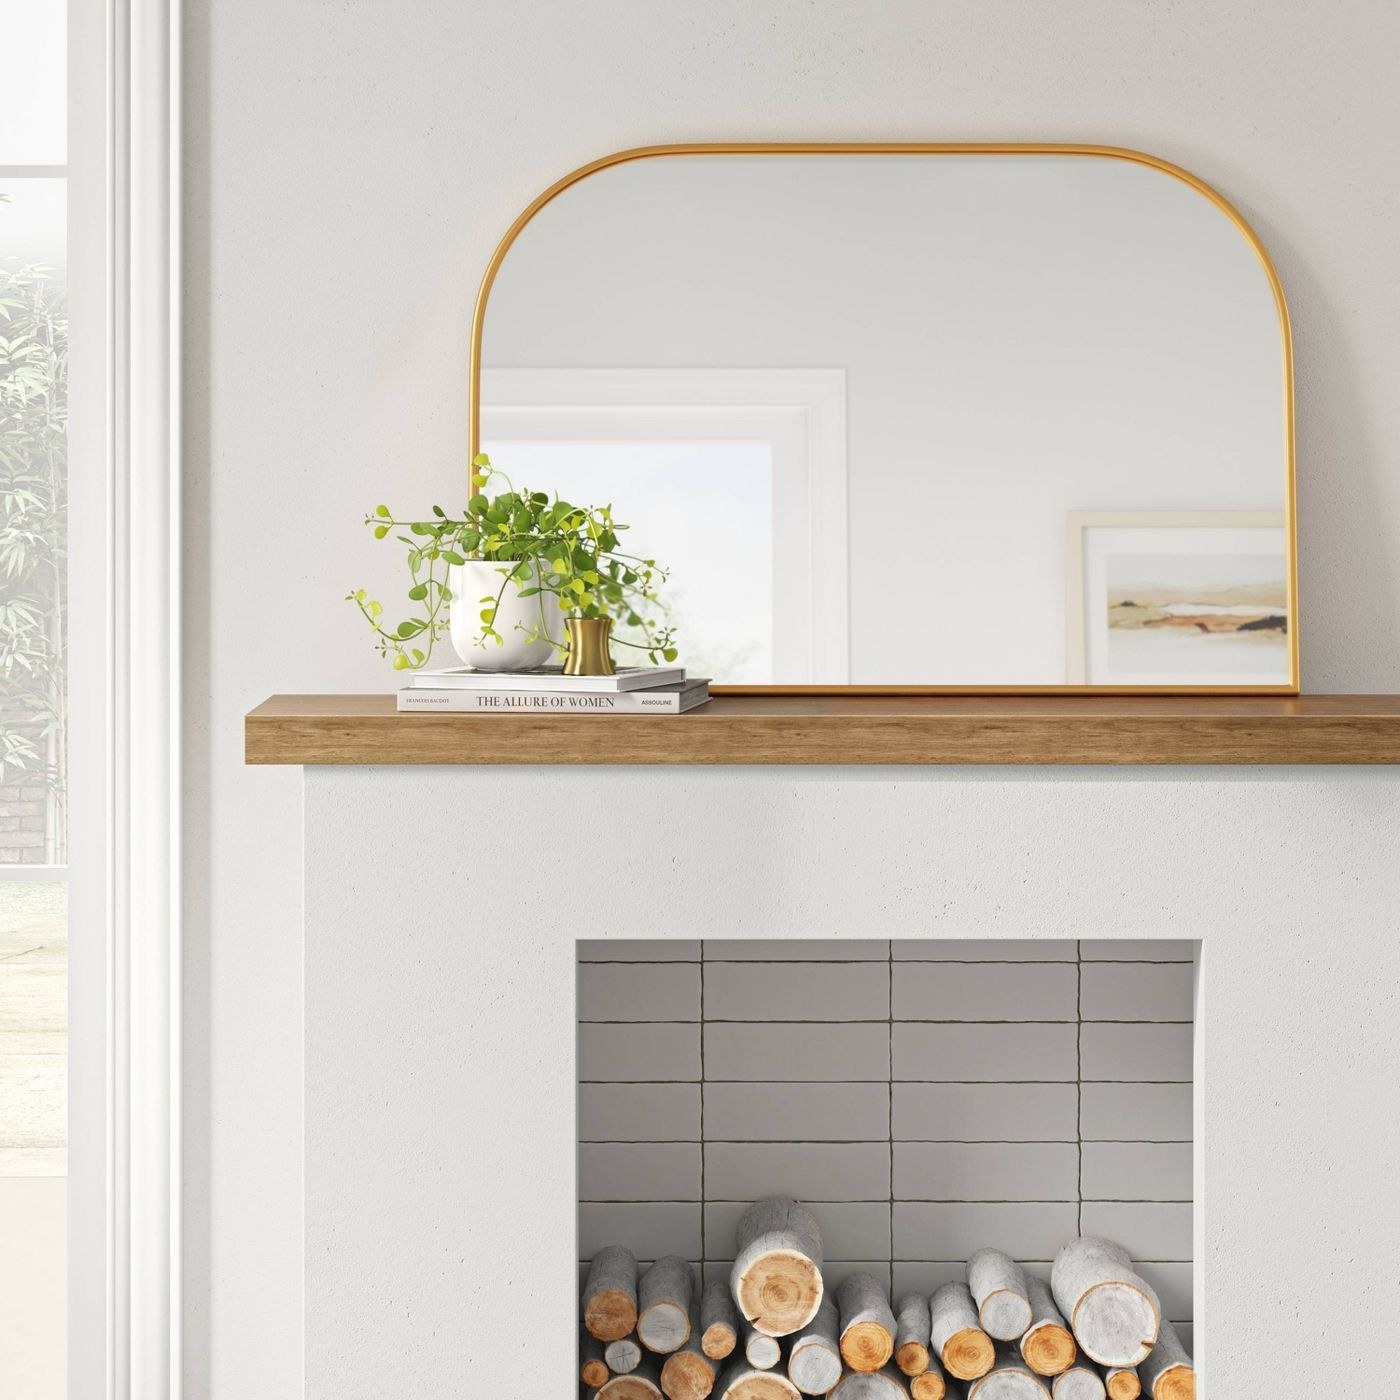 arch-shaped mirror with gold trim sitting on a mantle above a fireplace